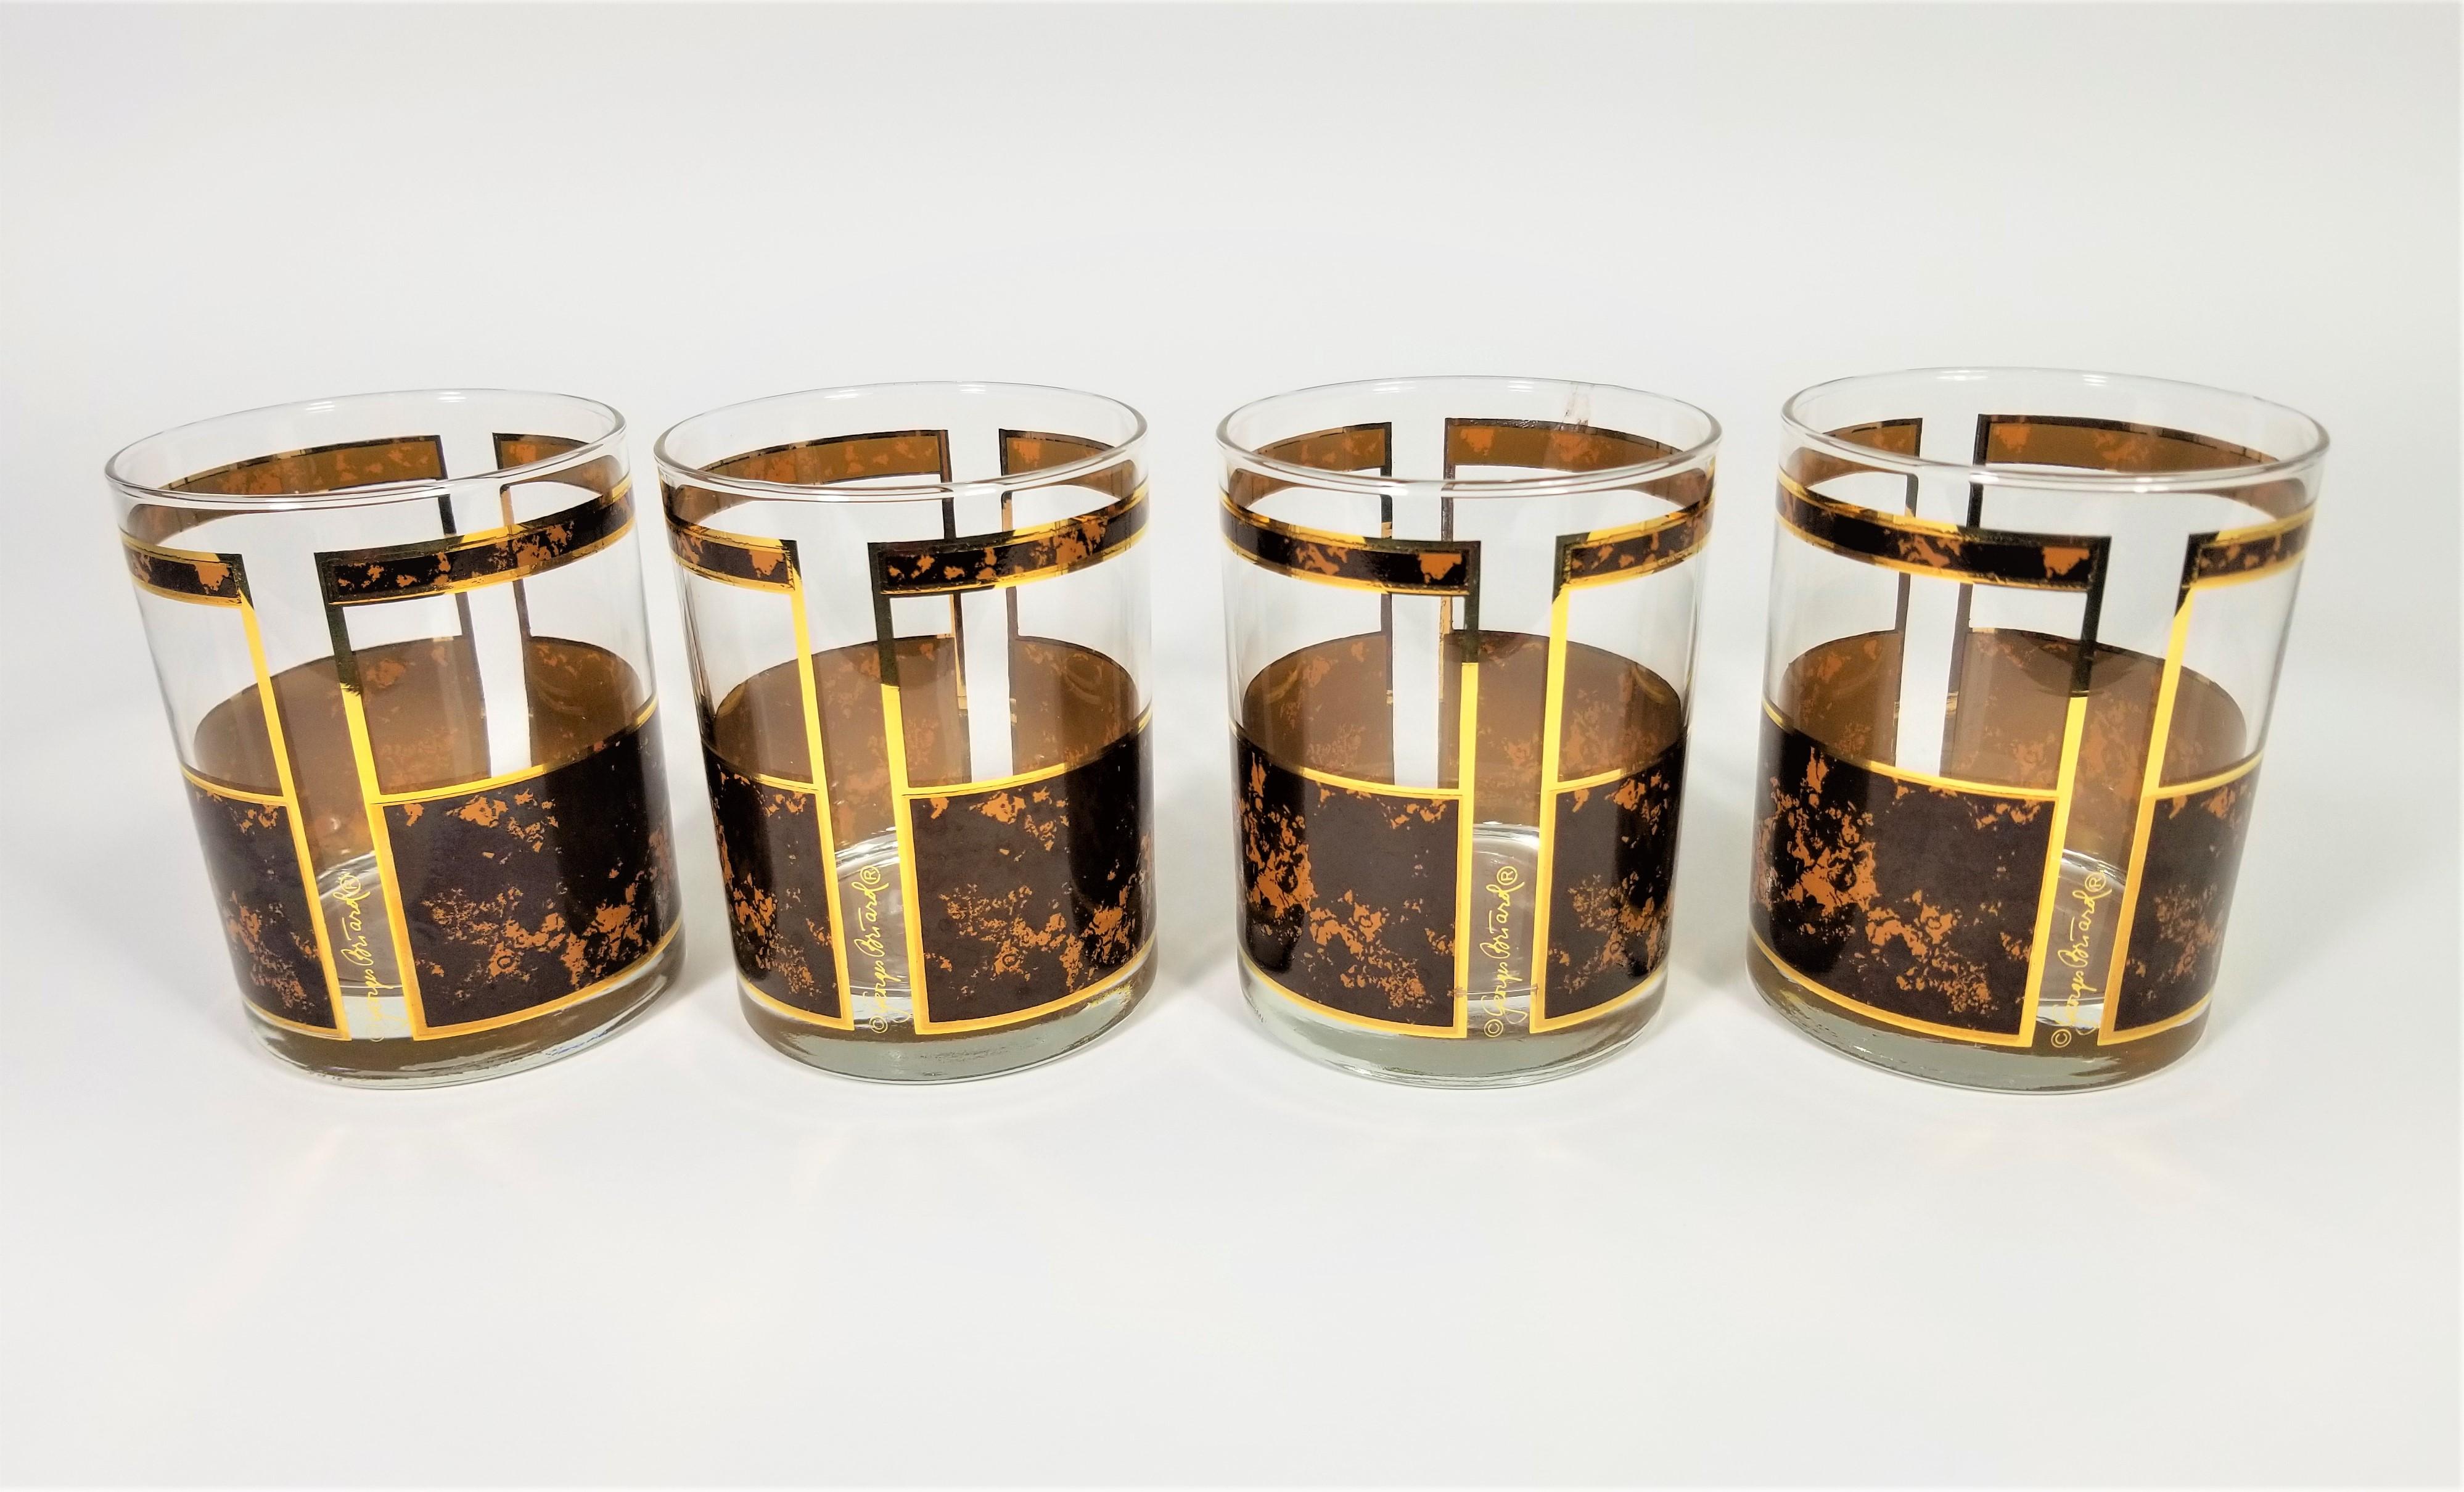 Mid Century 1960s 1970s Georges Briard Glassware Barware. Double Old Fashioned Glasses. Leather or Tortious Design with Gold accent trim. Set of 4. All glasses are Signed and in Excellent Condition. 